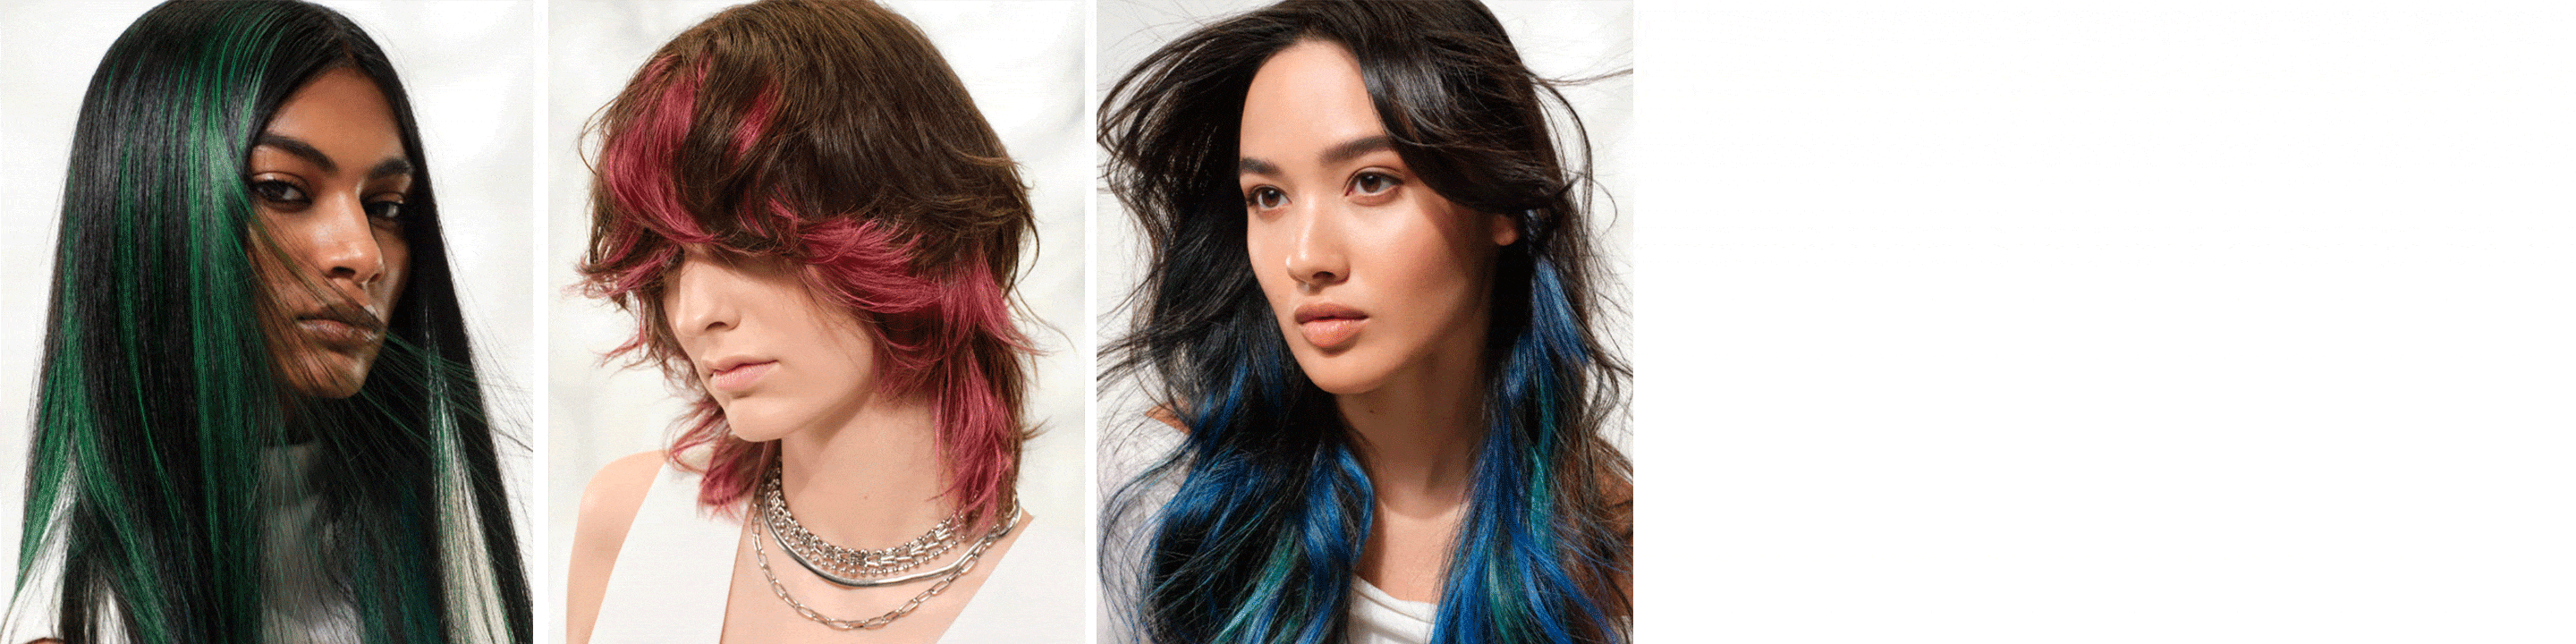 Find a salon to discover your 100% vegan hair color